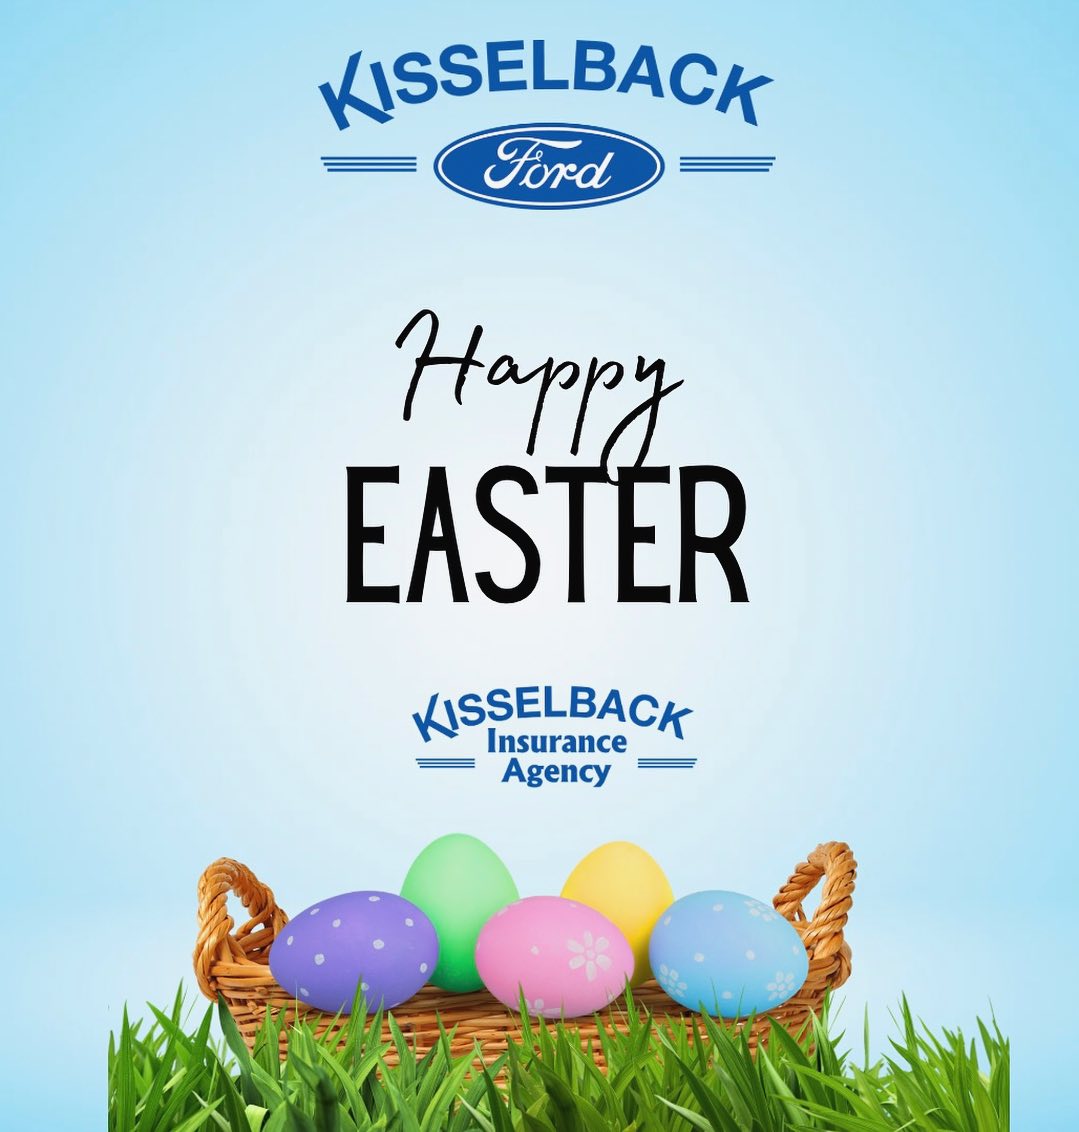 Wishing you and your loved ones a great Easter weekend! We’ll be here all day today and Saturday, @KisselbackFord will be closed Sunday as usual.